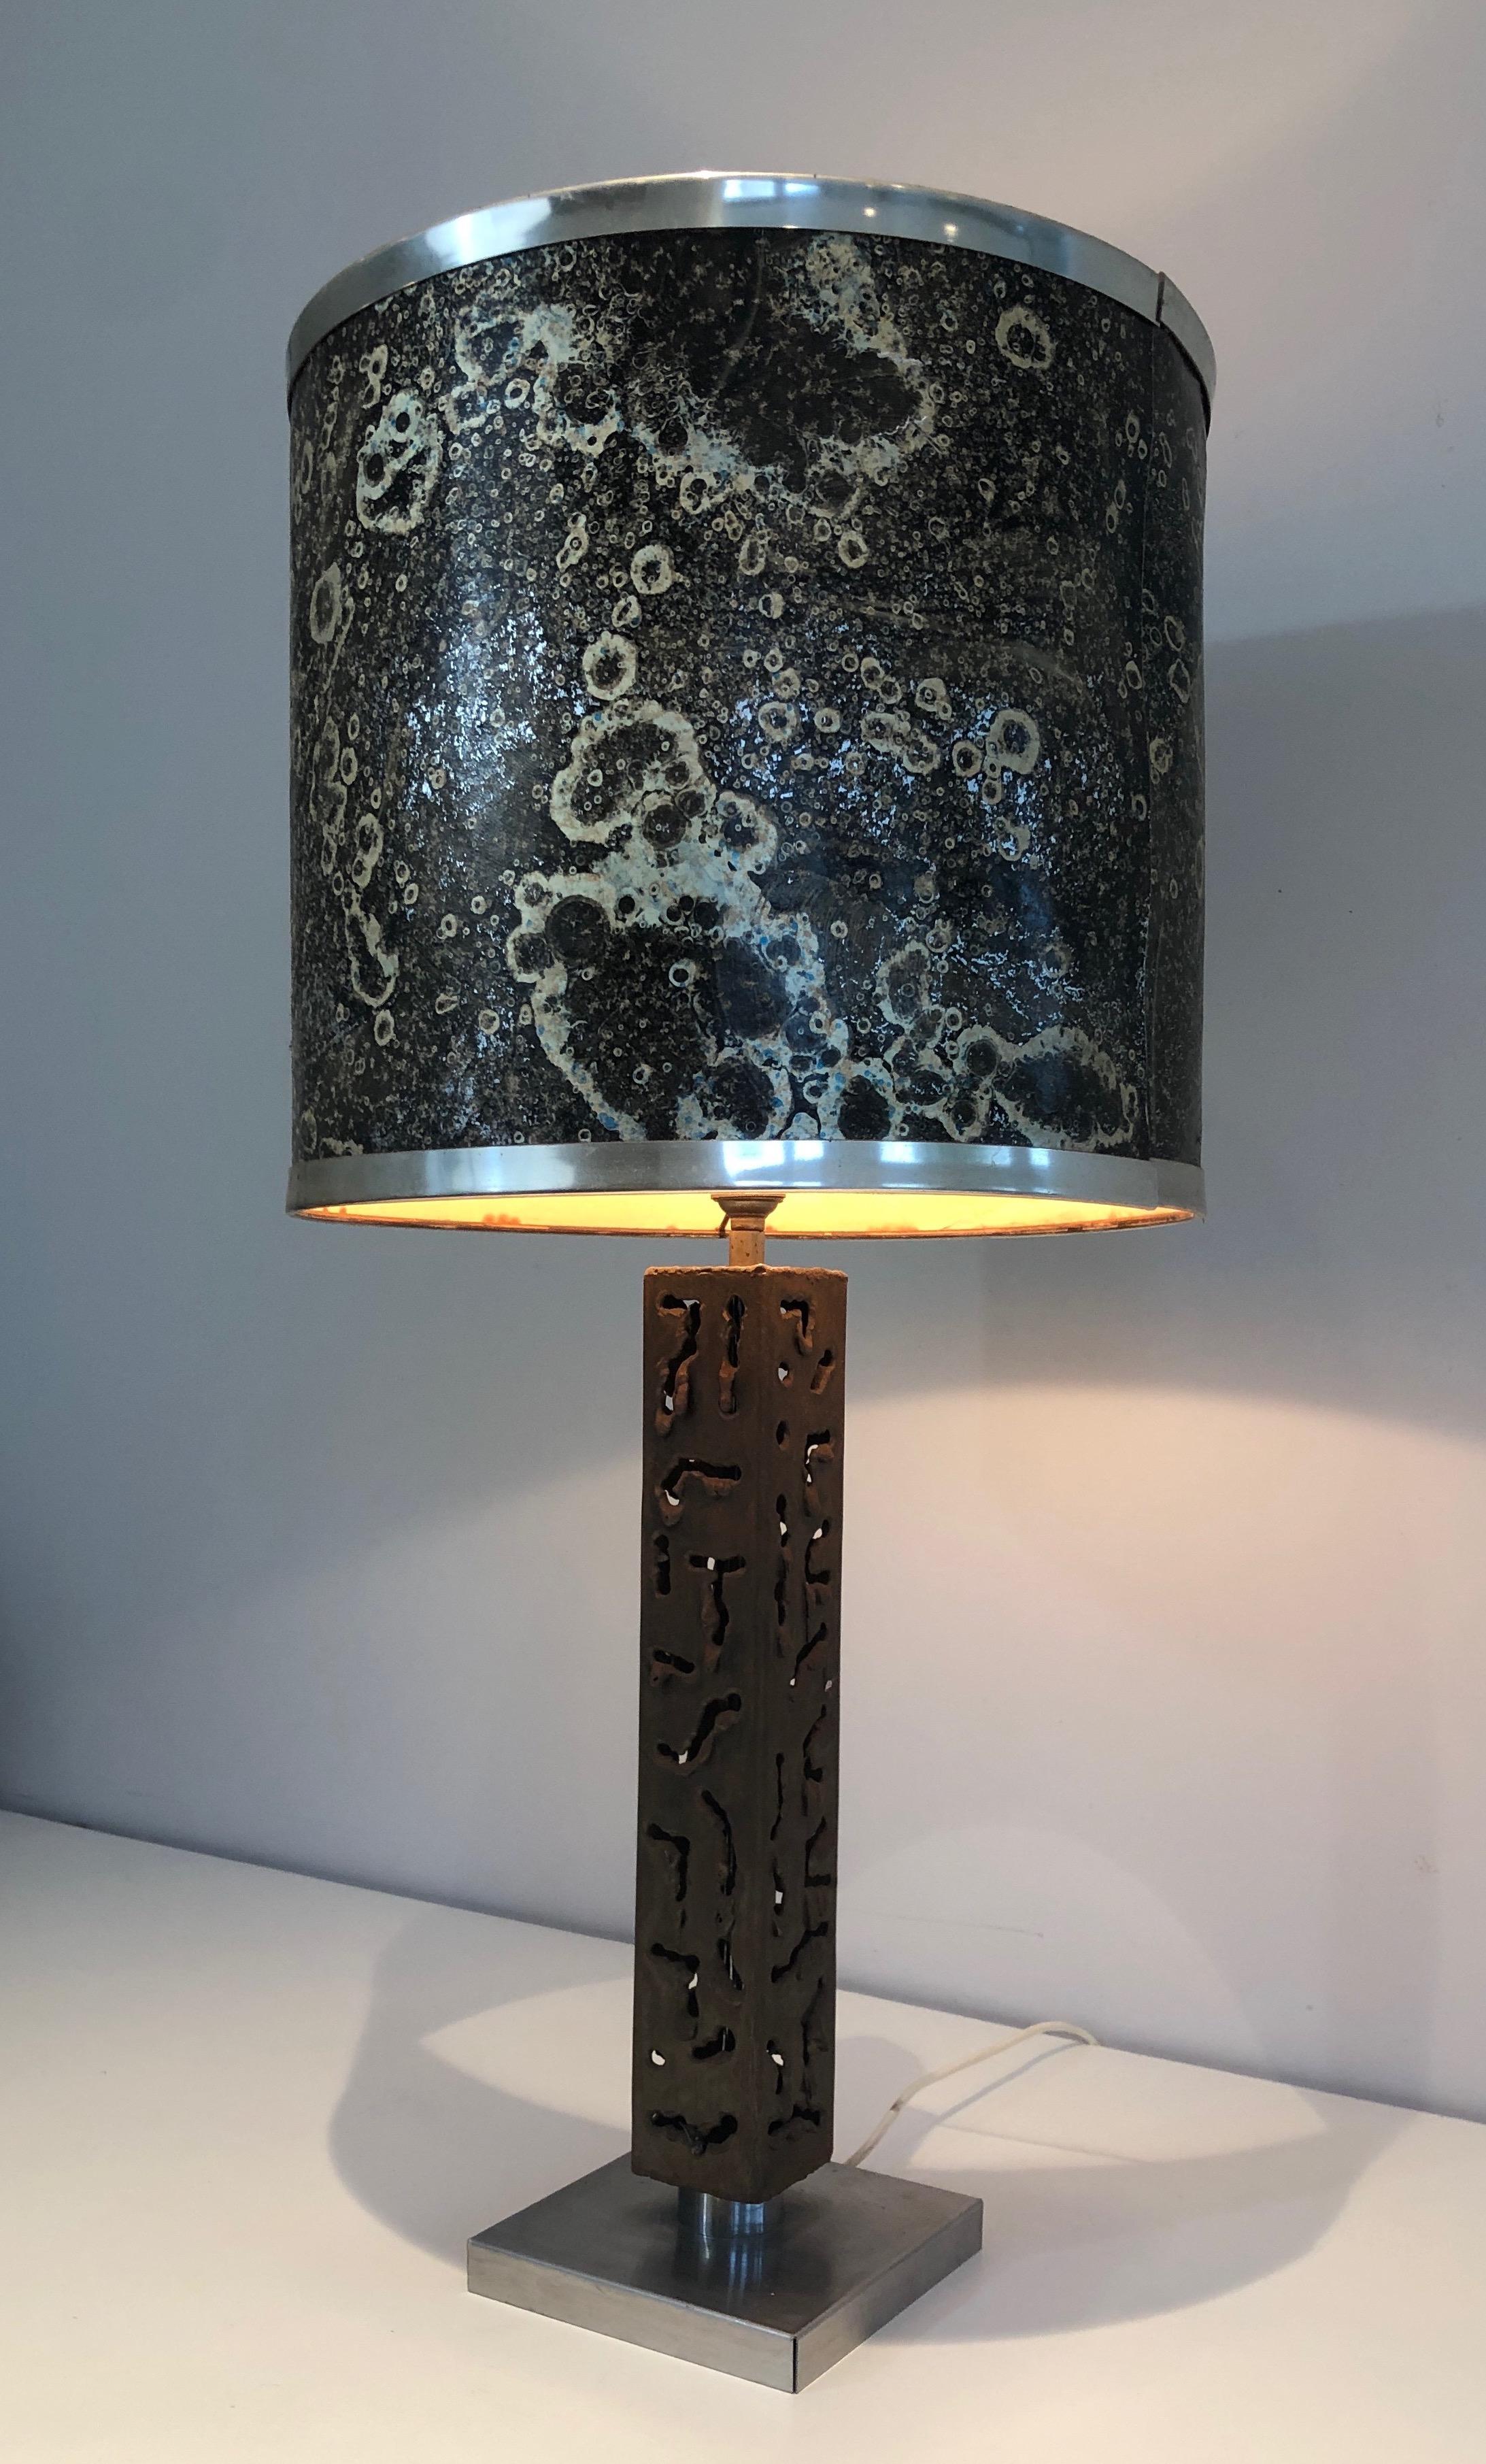 Brutalist Worked Steel Design Table Lamp, French Work, circa 1970 For Sale